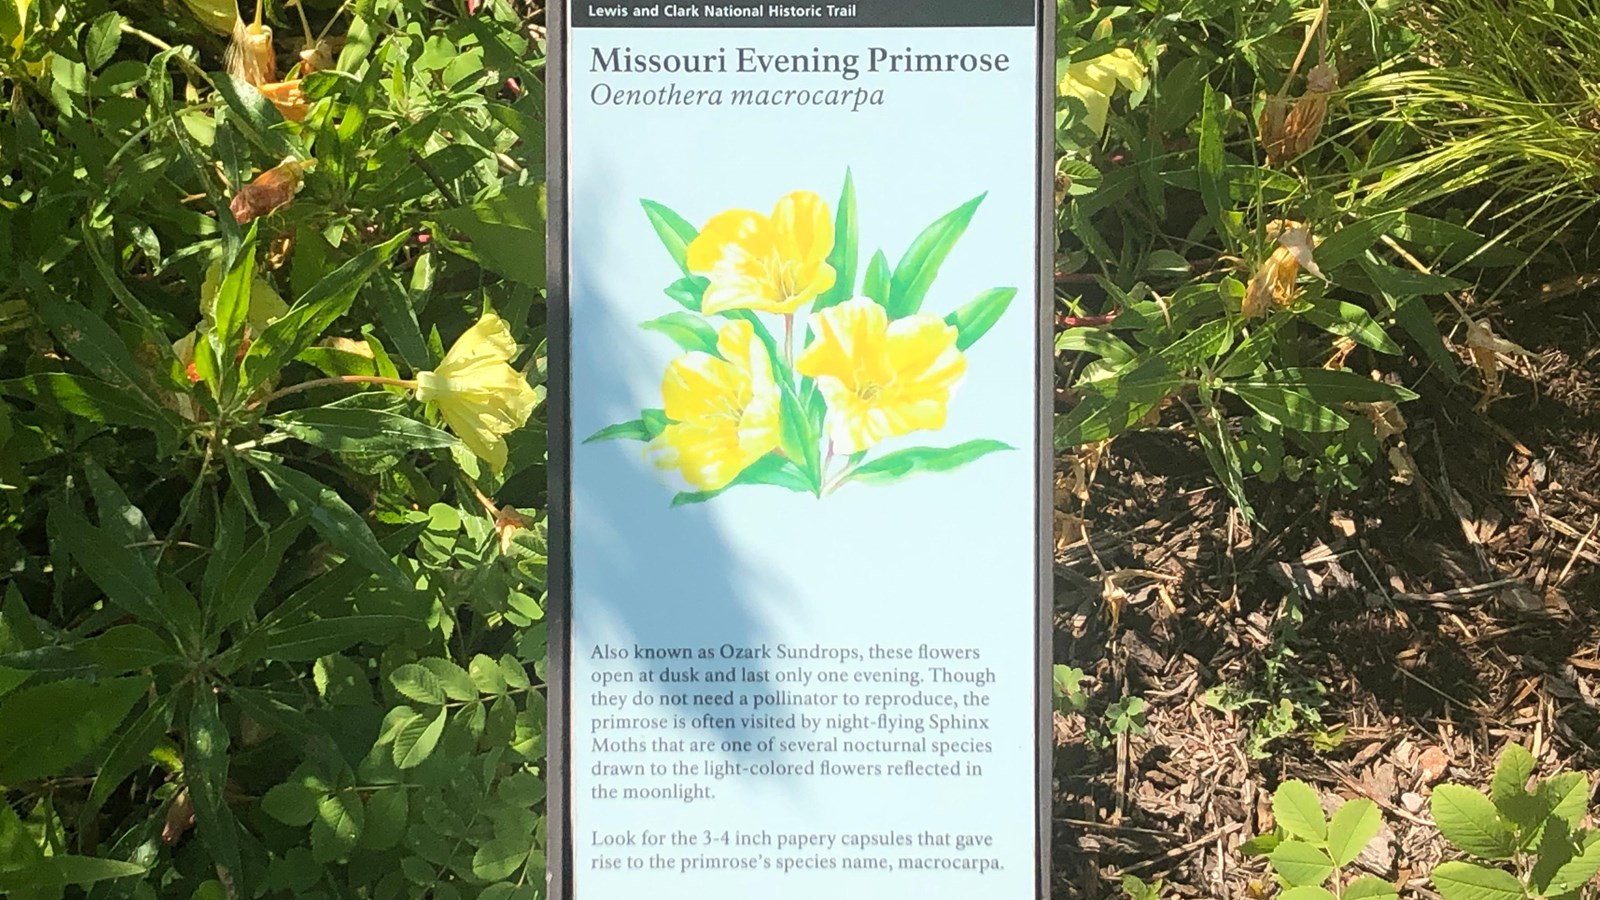 A small sign is placed near a green plant. The sign describes the Missouri Evening Primrose